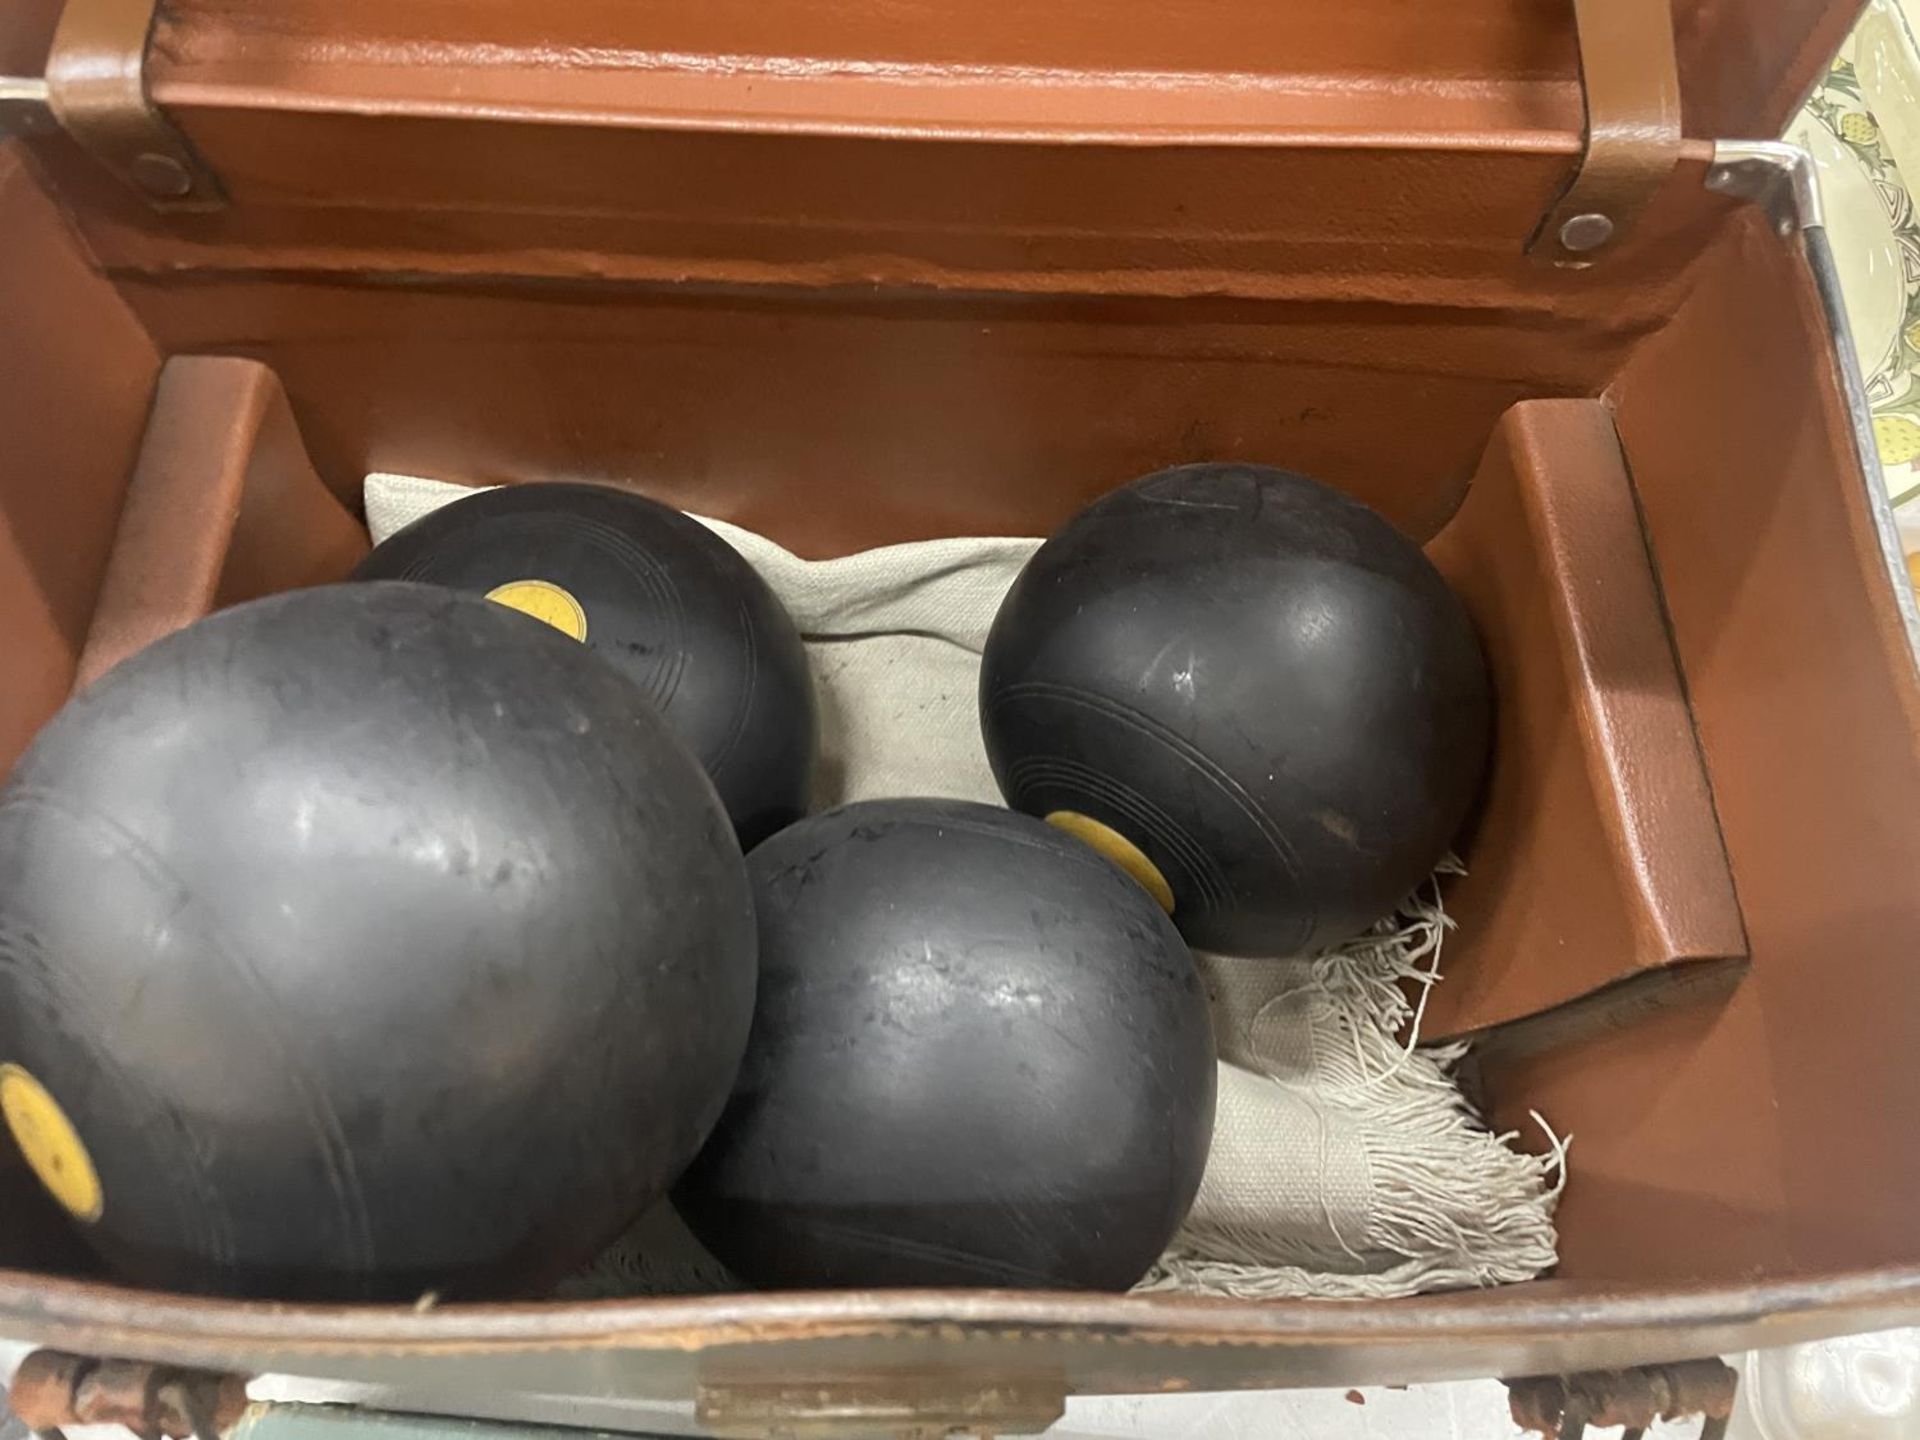 FOUR IDENTICAL BOWLING BOWLS, NUMBERED 1, 2, 3 AND 4 IN A VINTAGE LEATHER CASE - Image 3 of 3